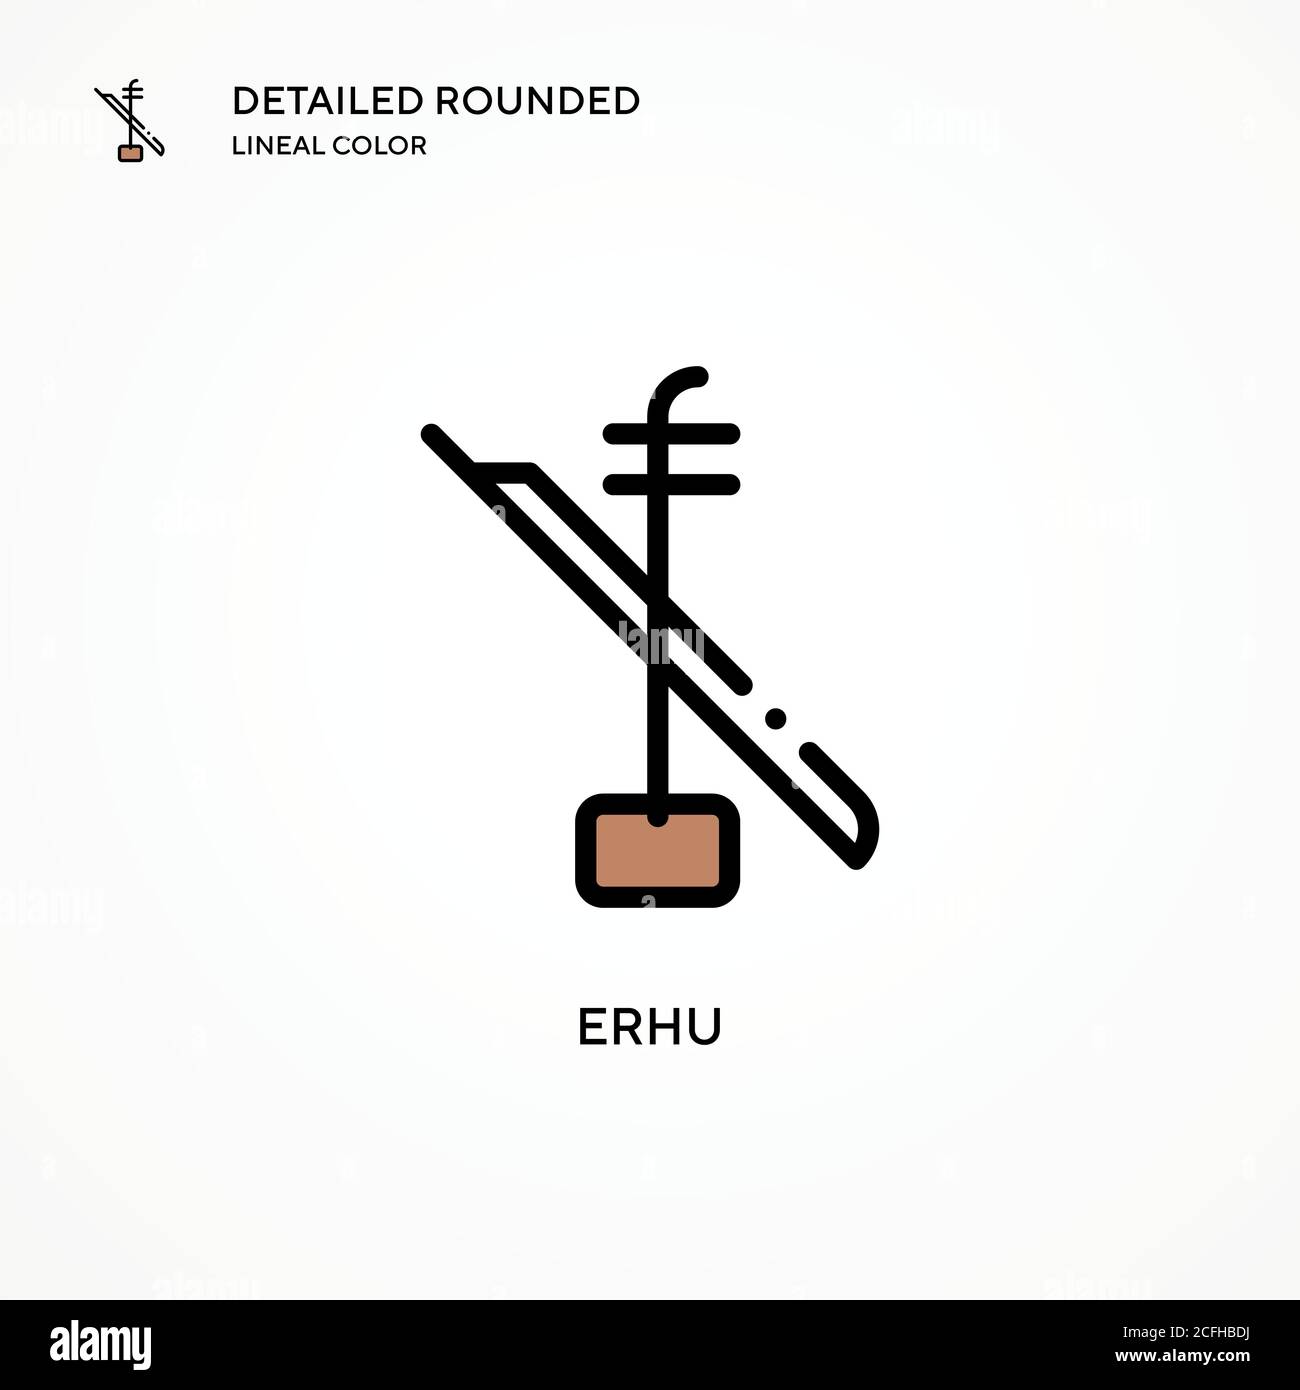 Erhu vector icon. Modern vector illustration concepts. Easy to edit and customize. Stock Vector